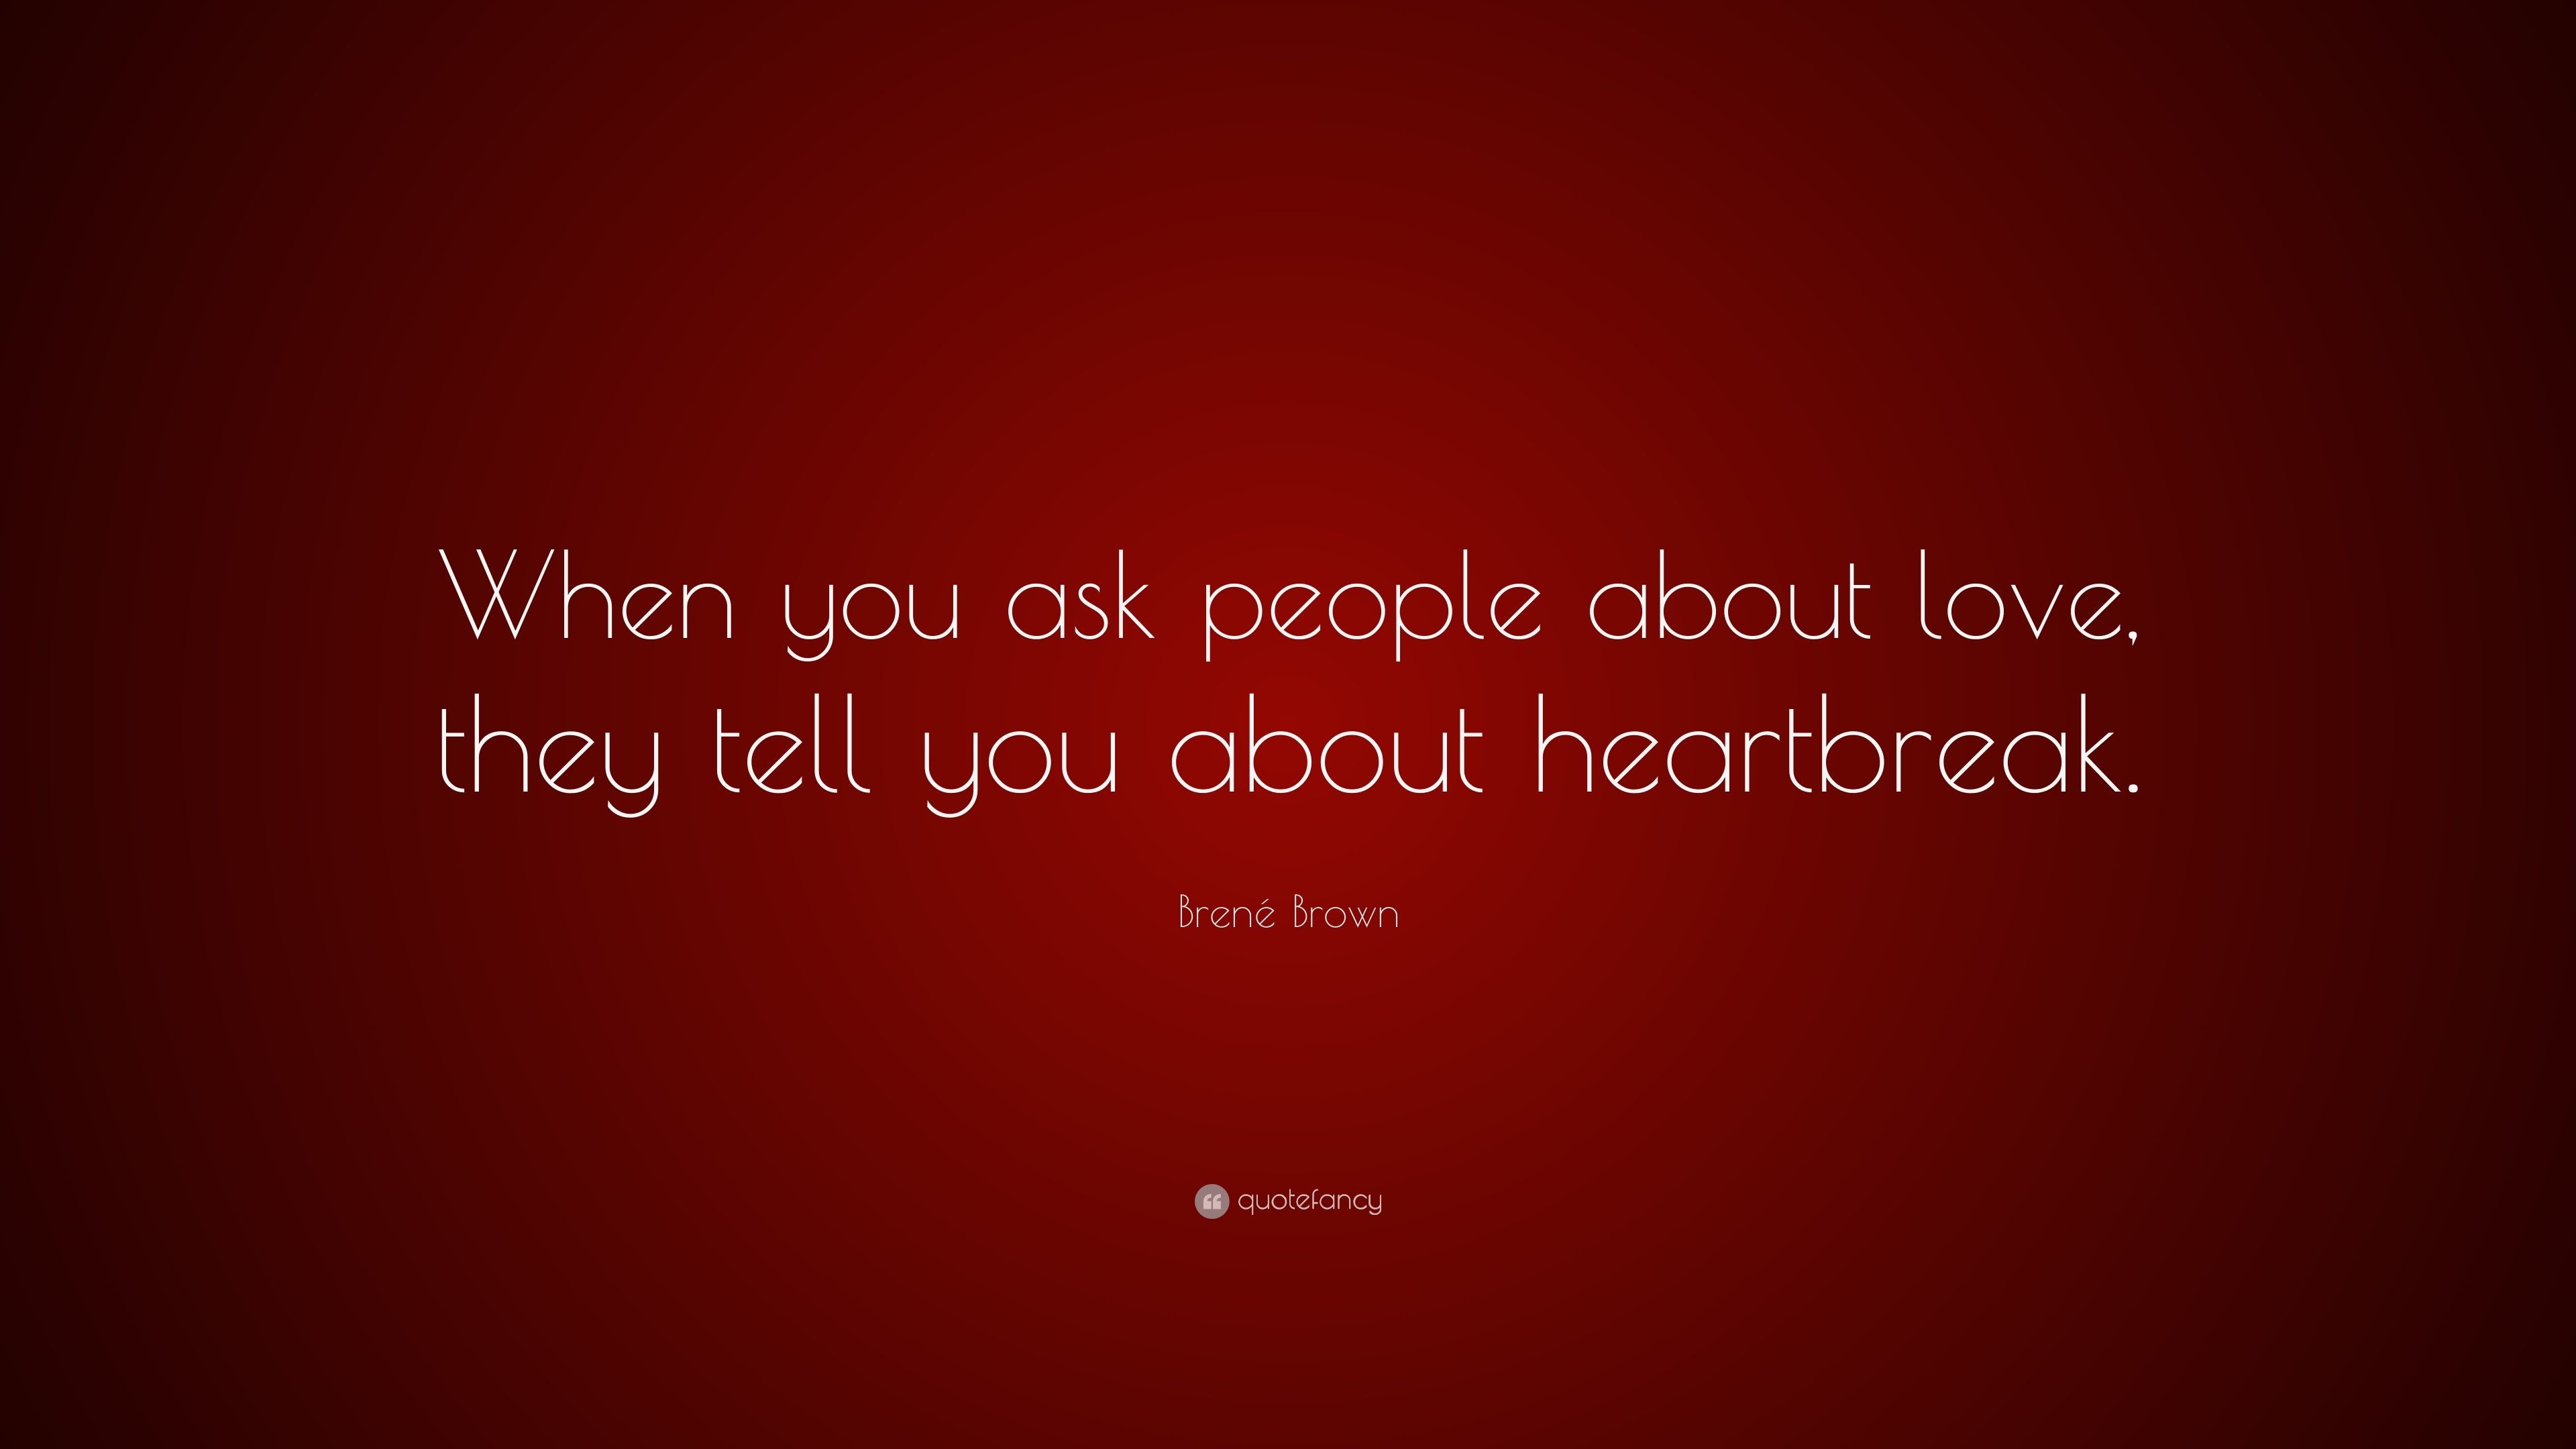 3840x2160 BrenÃ© Brown Quote: “When you ask people about love, they tell you about